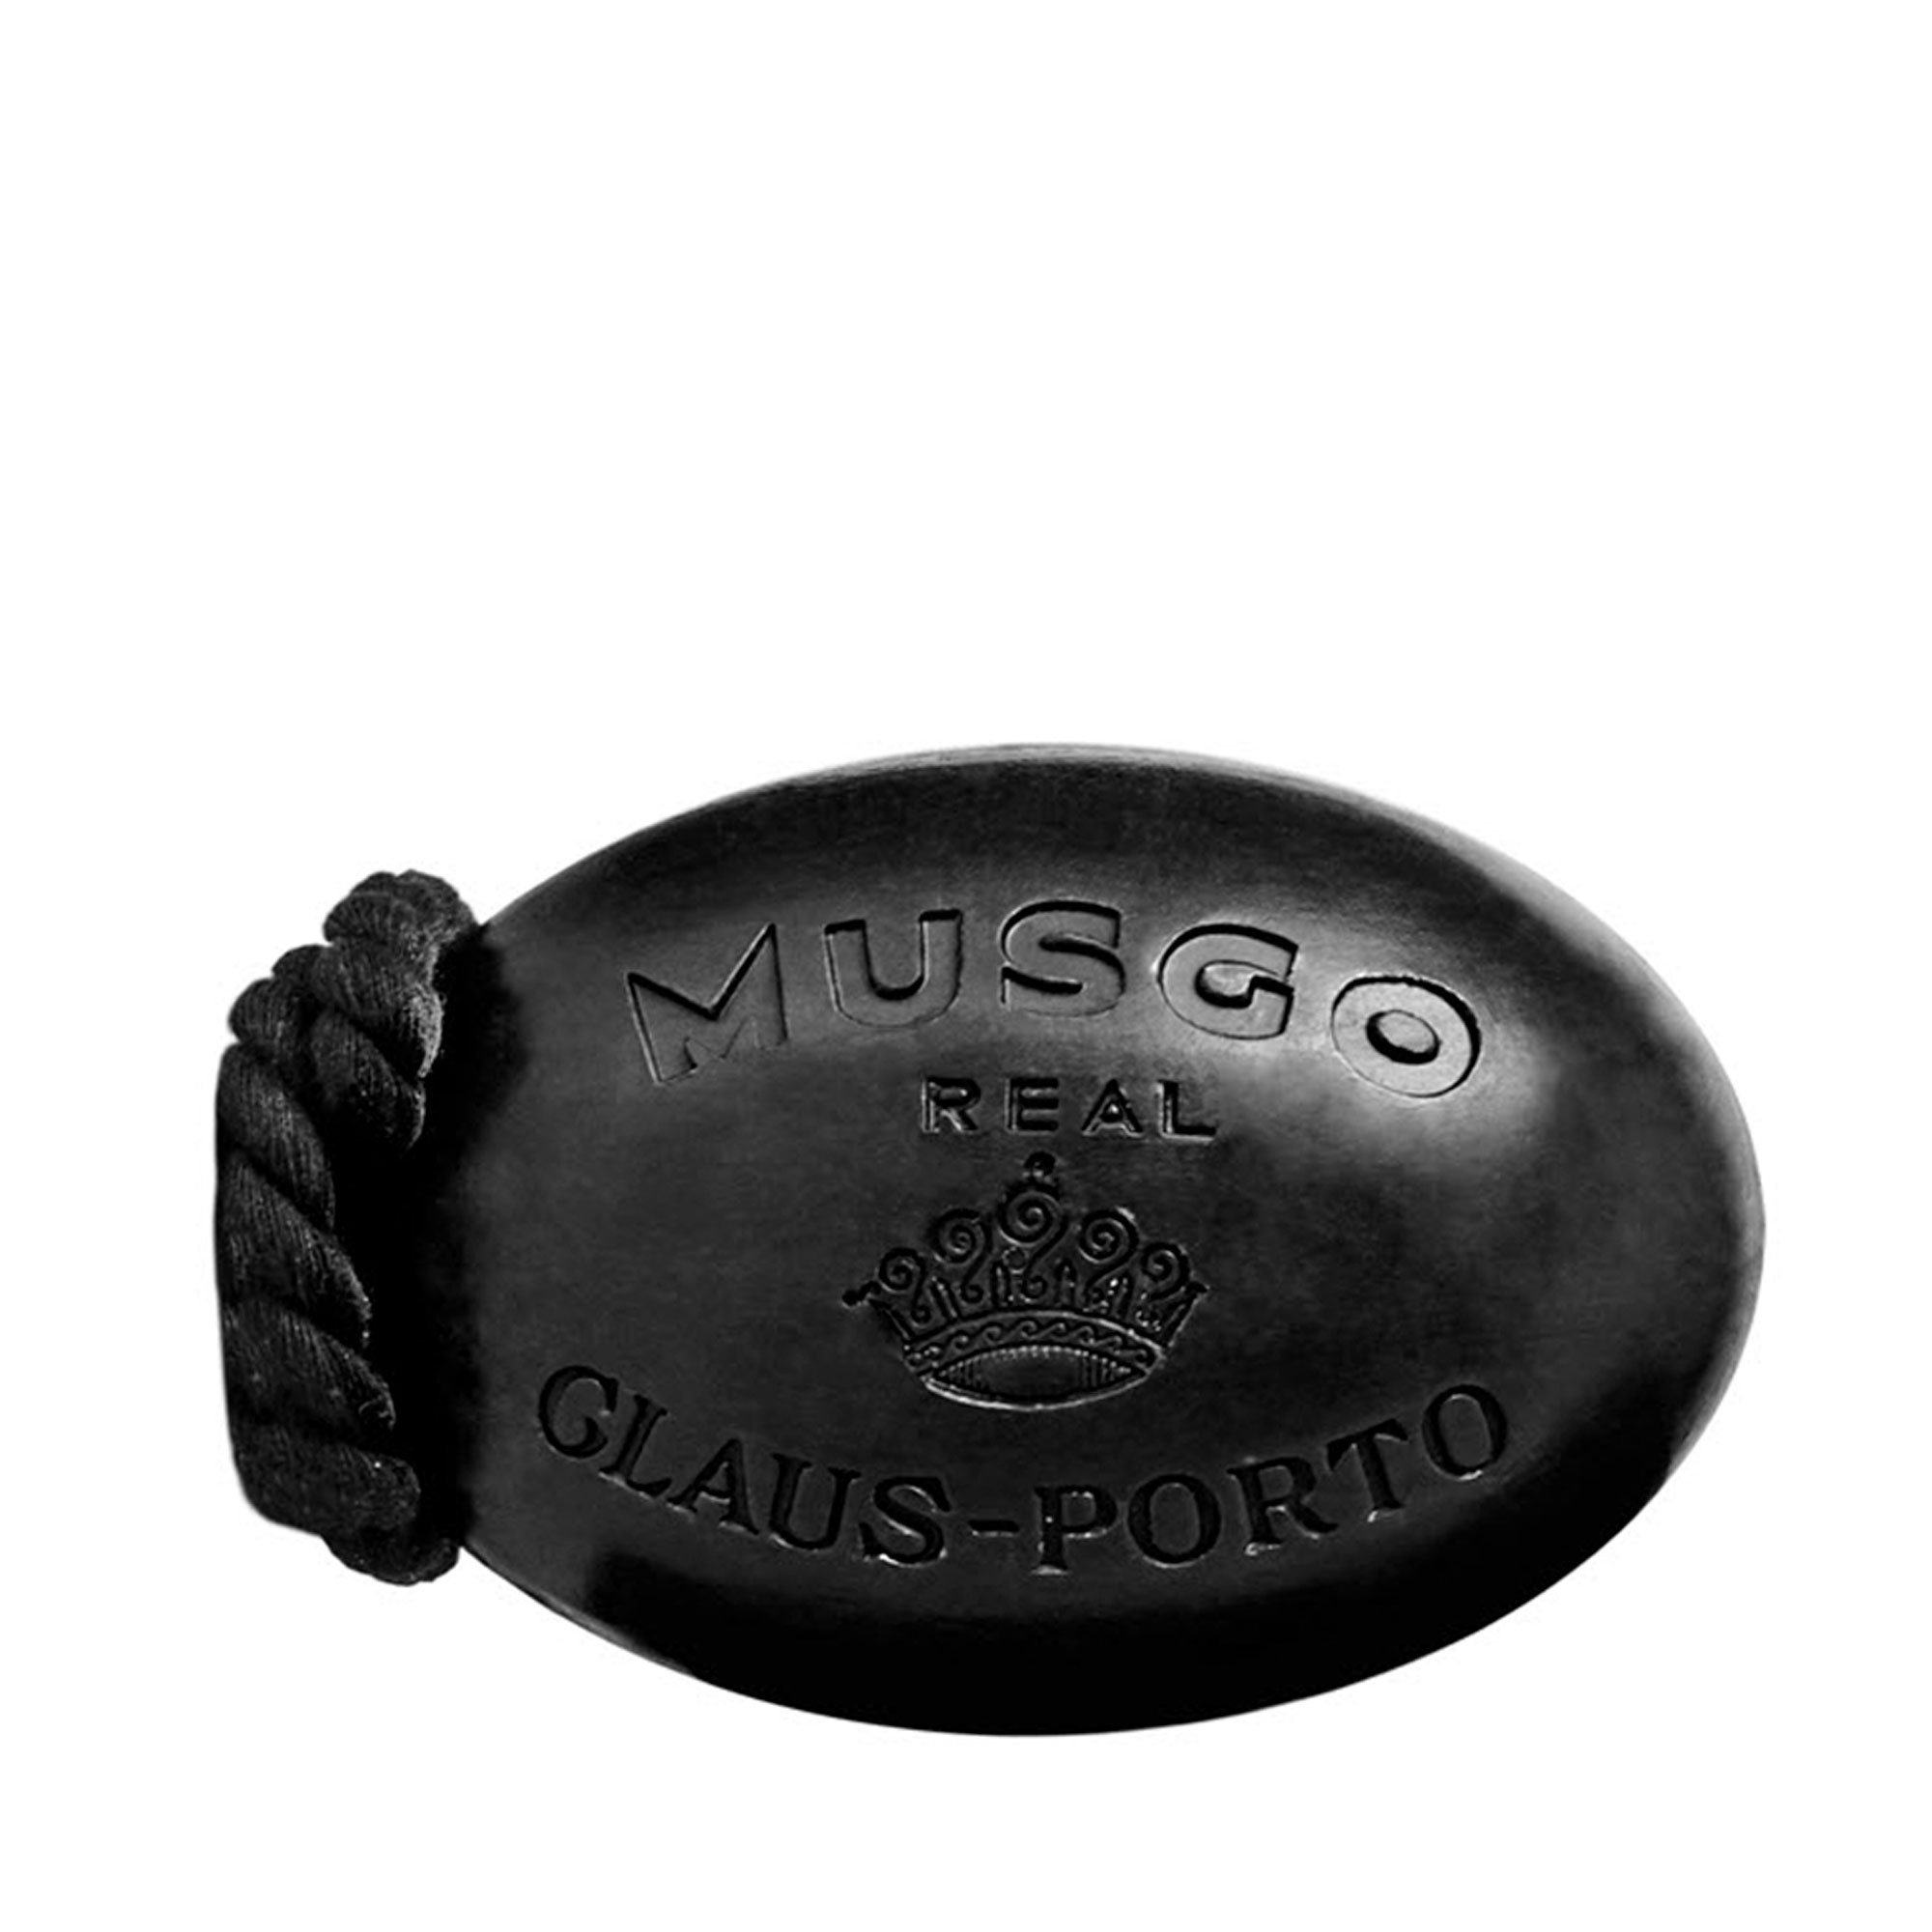 Musgo Real - Soap On A Rope - Körperseife - Black Edition